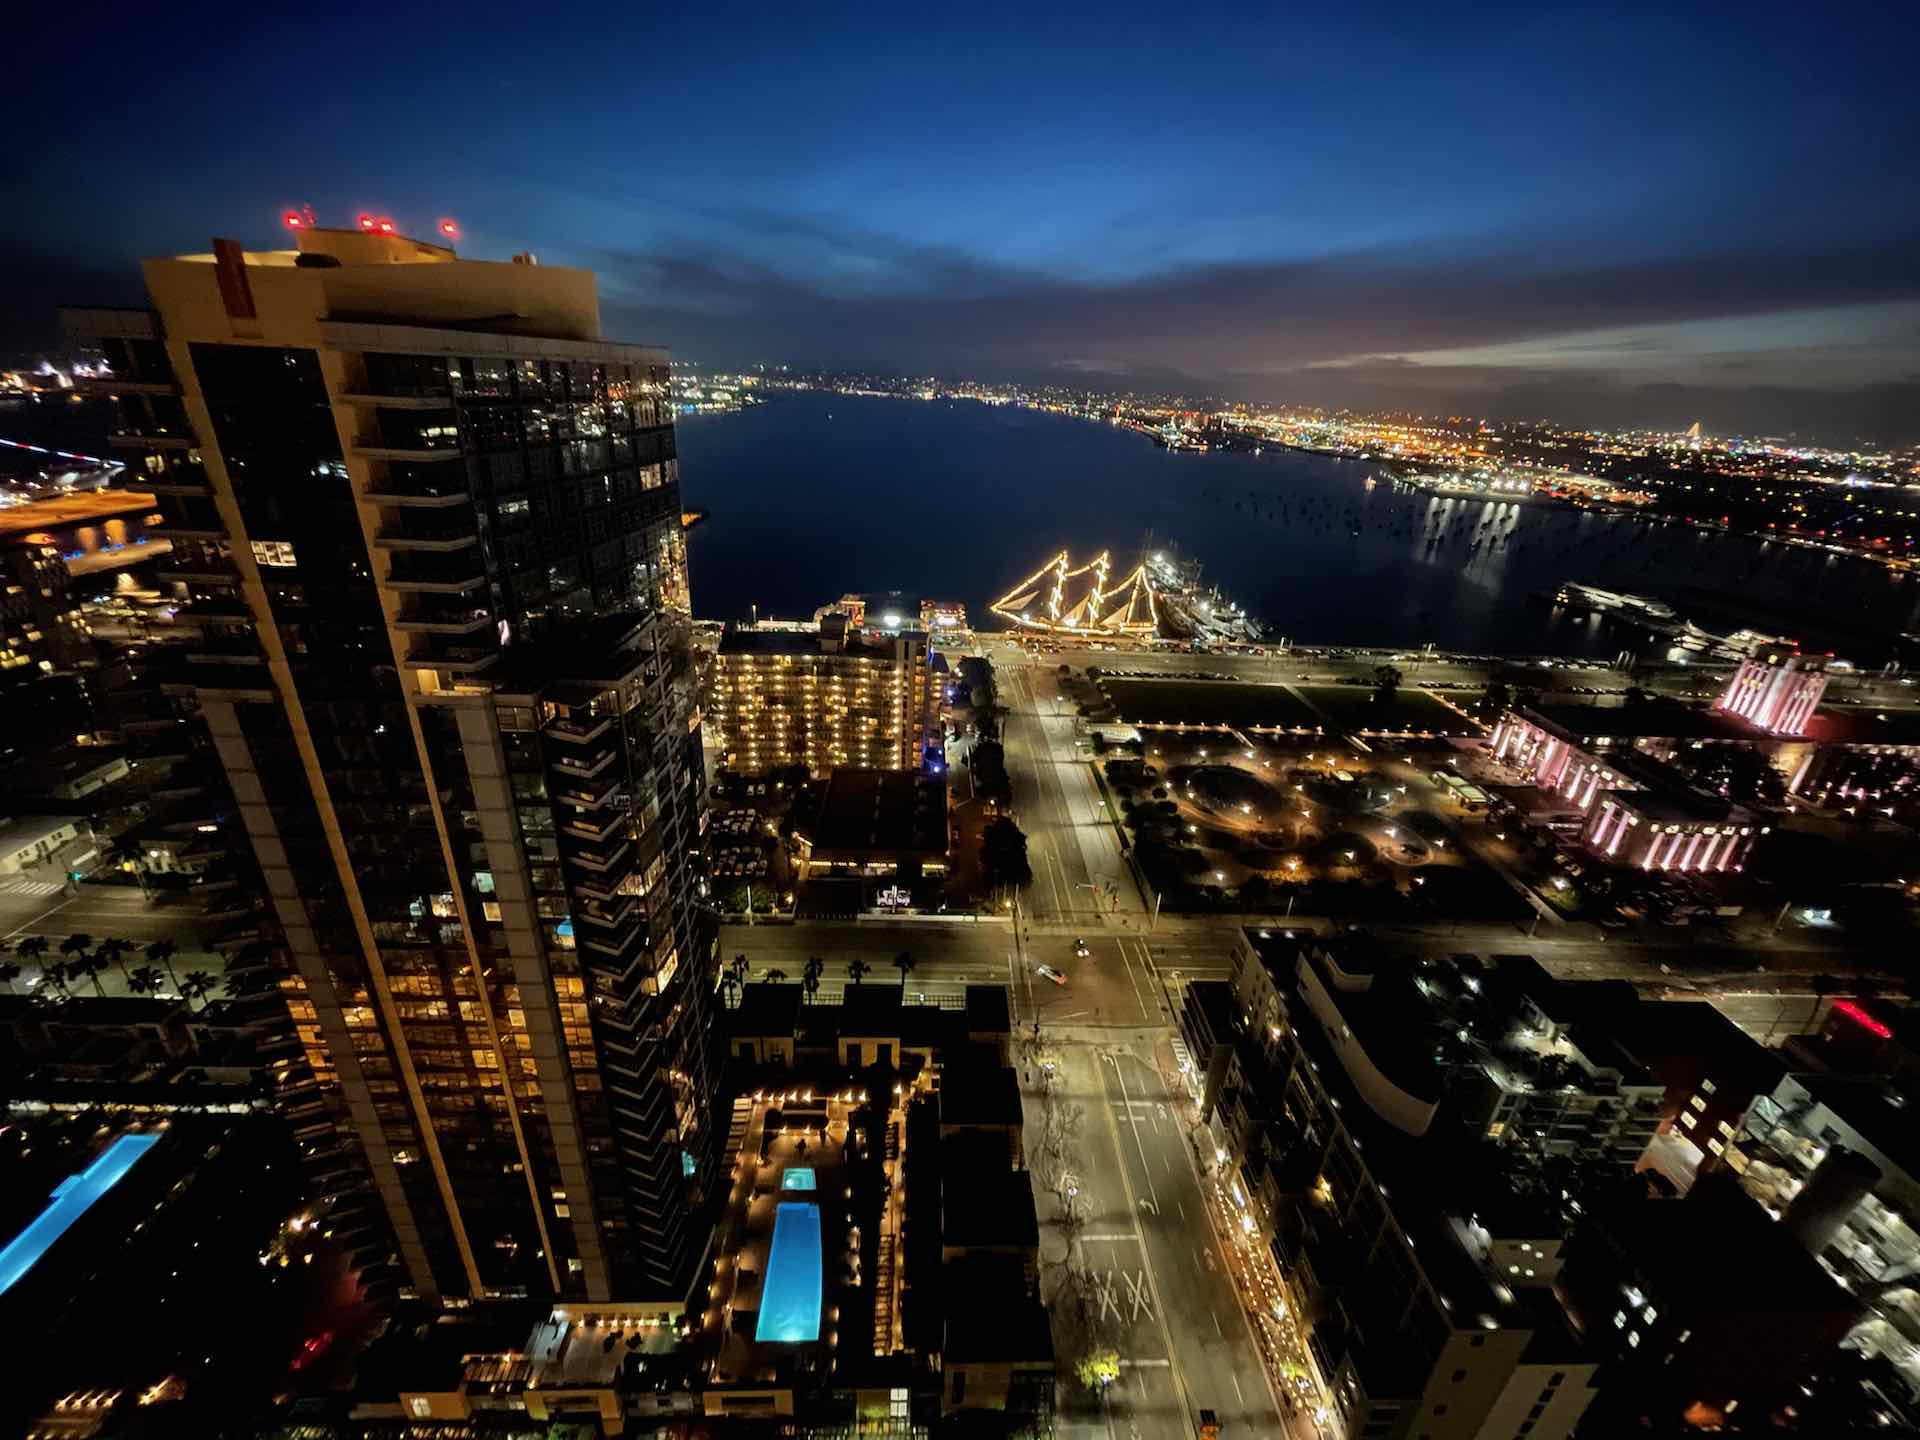 aerial view at night of the San Diego bay and surrounding buildings